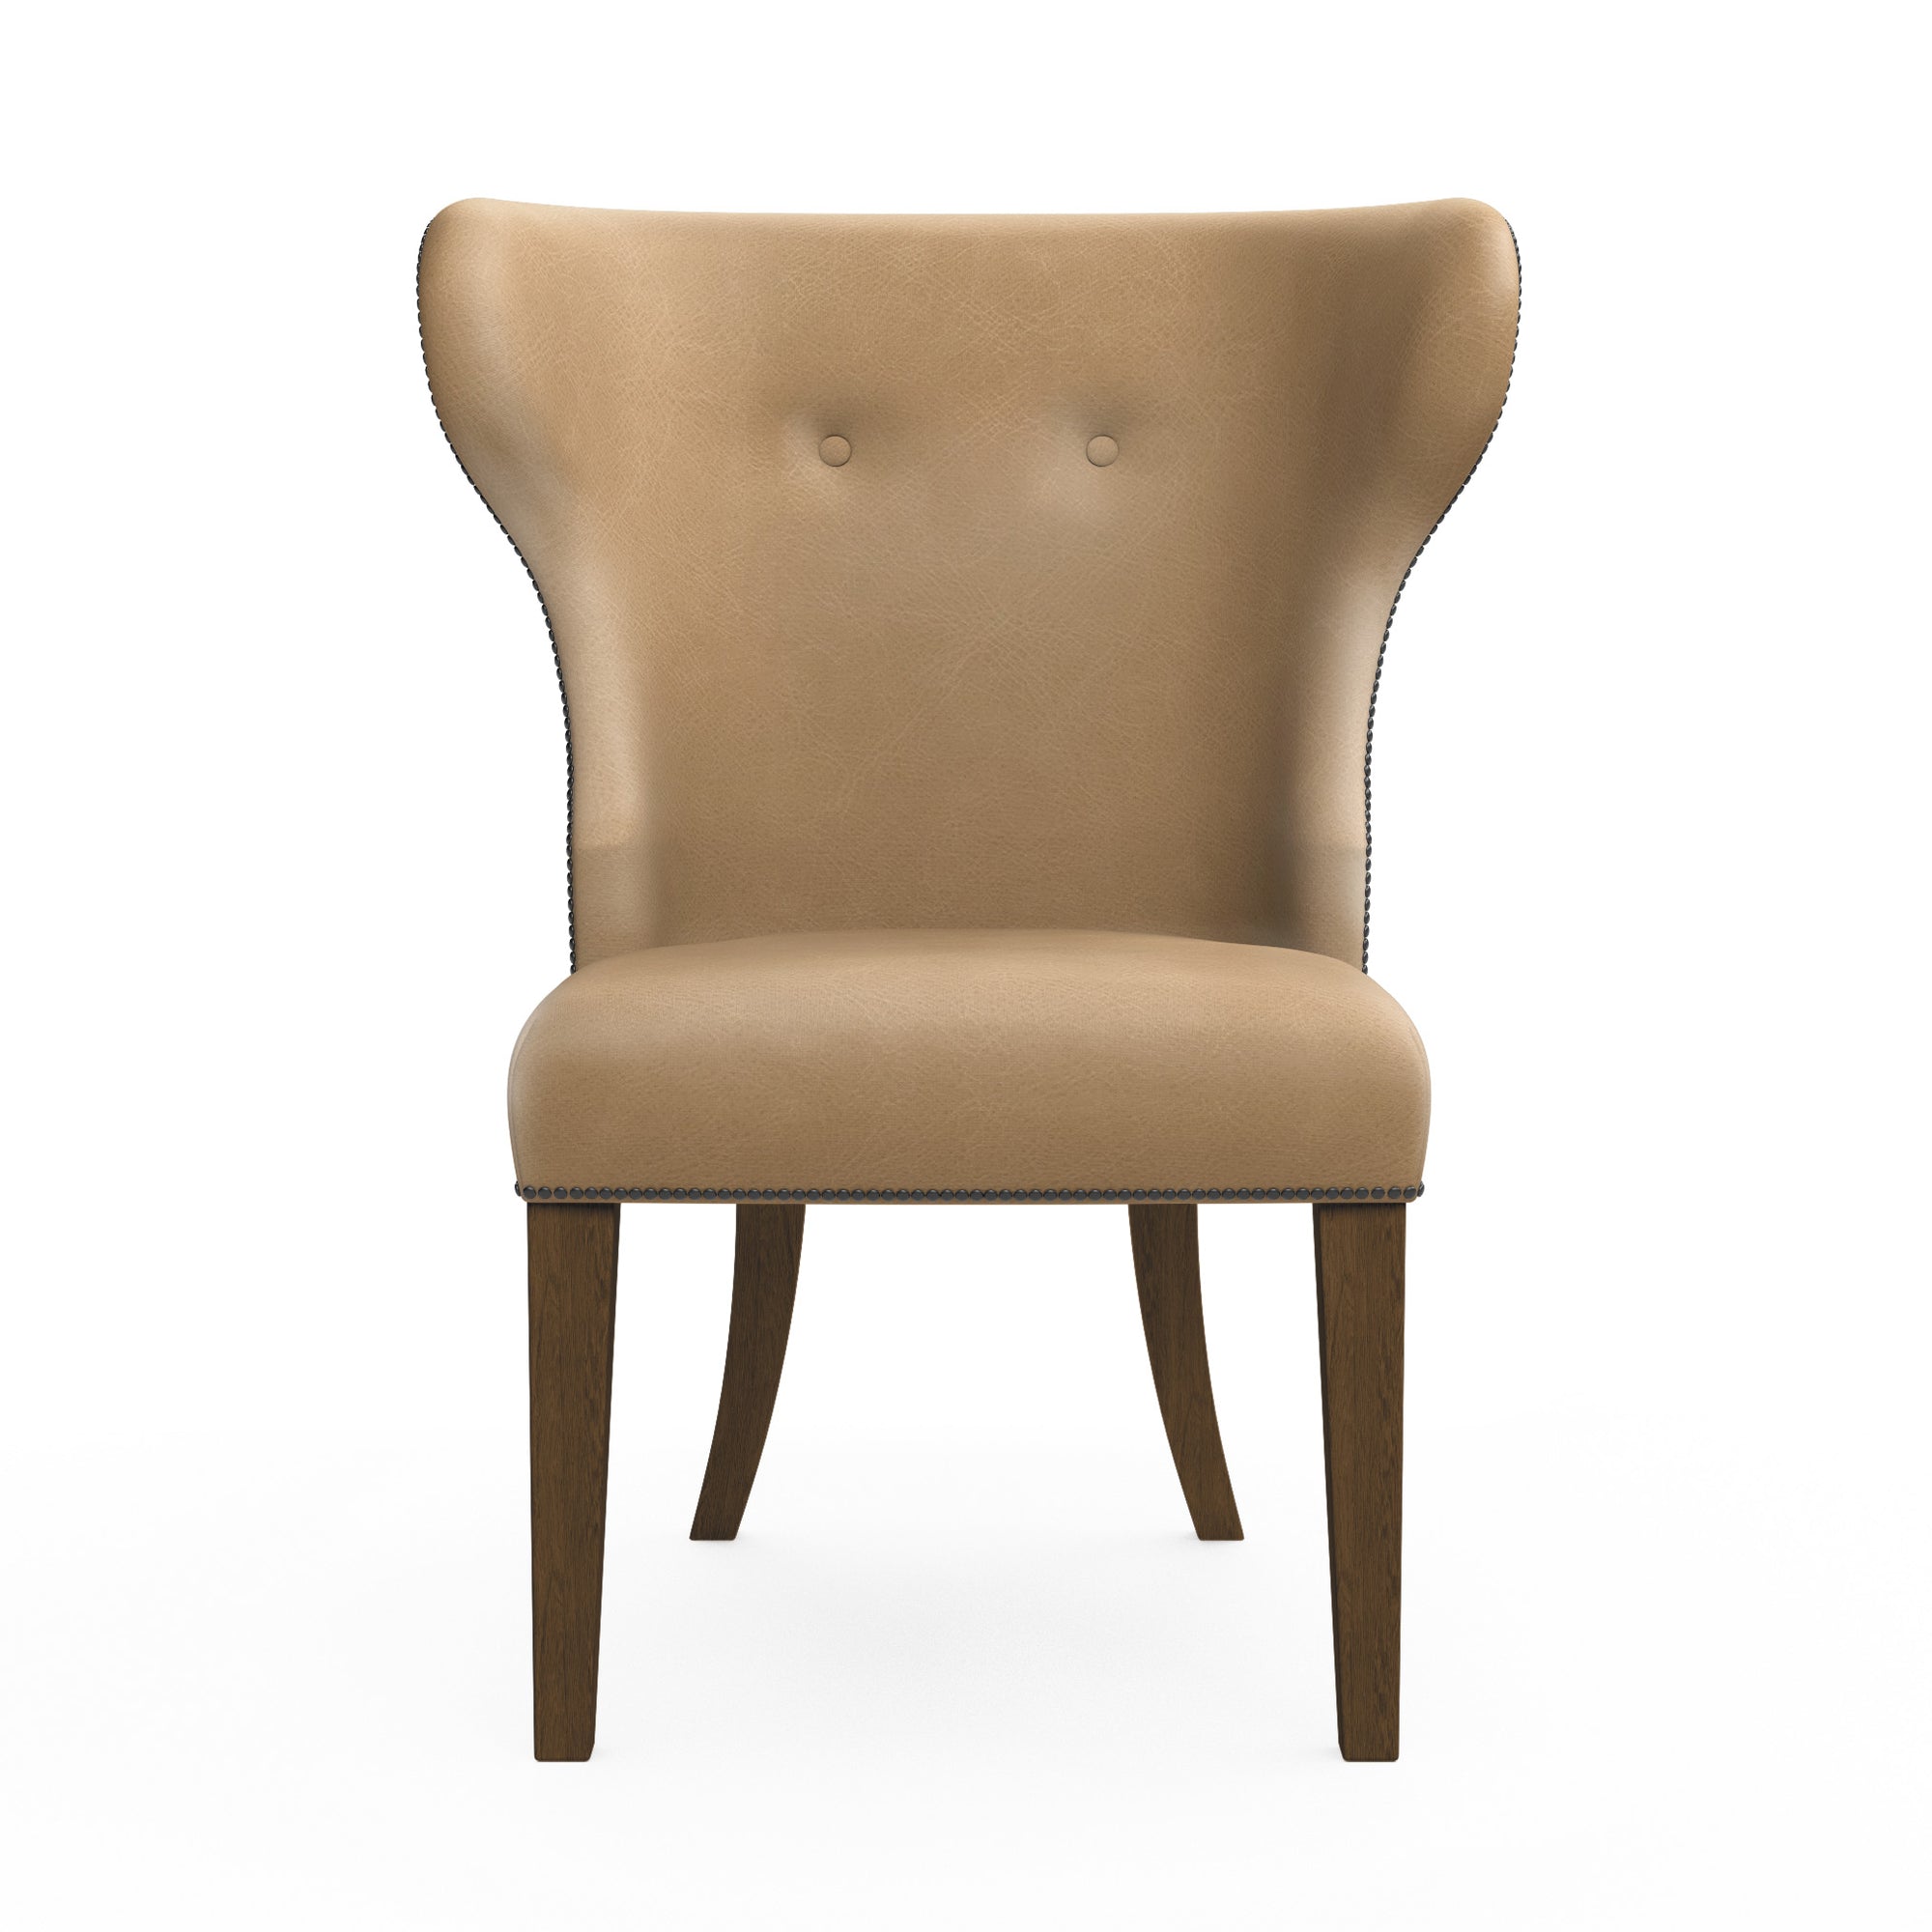 Nina Dining Chair - Marzipan Vintage Leather